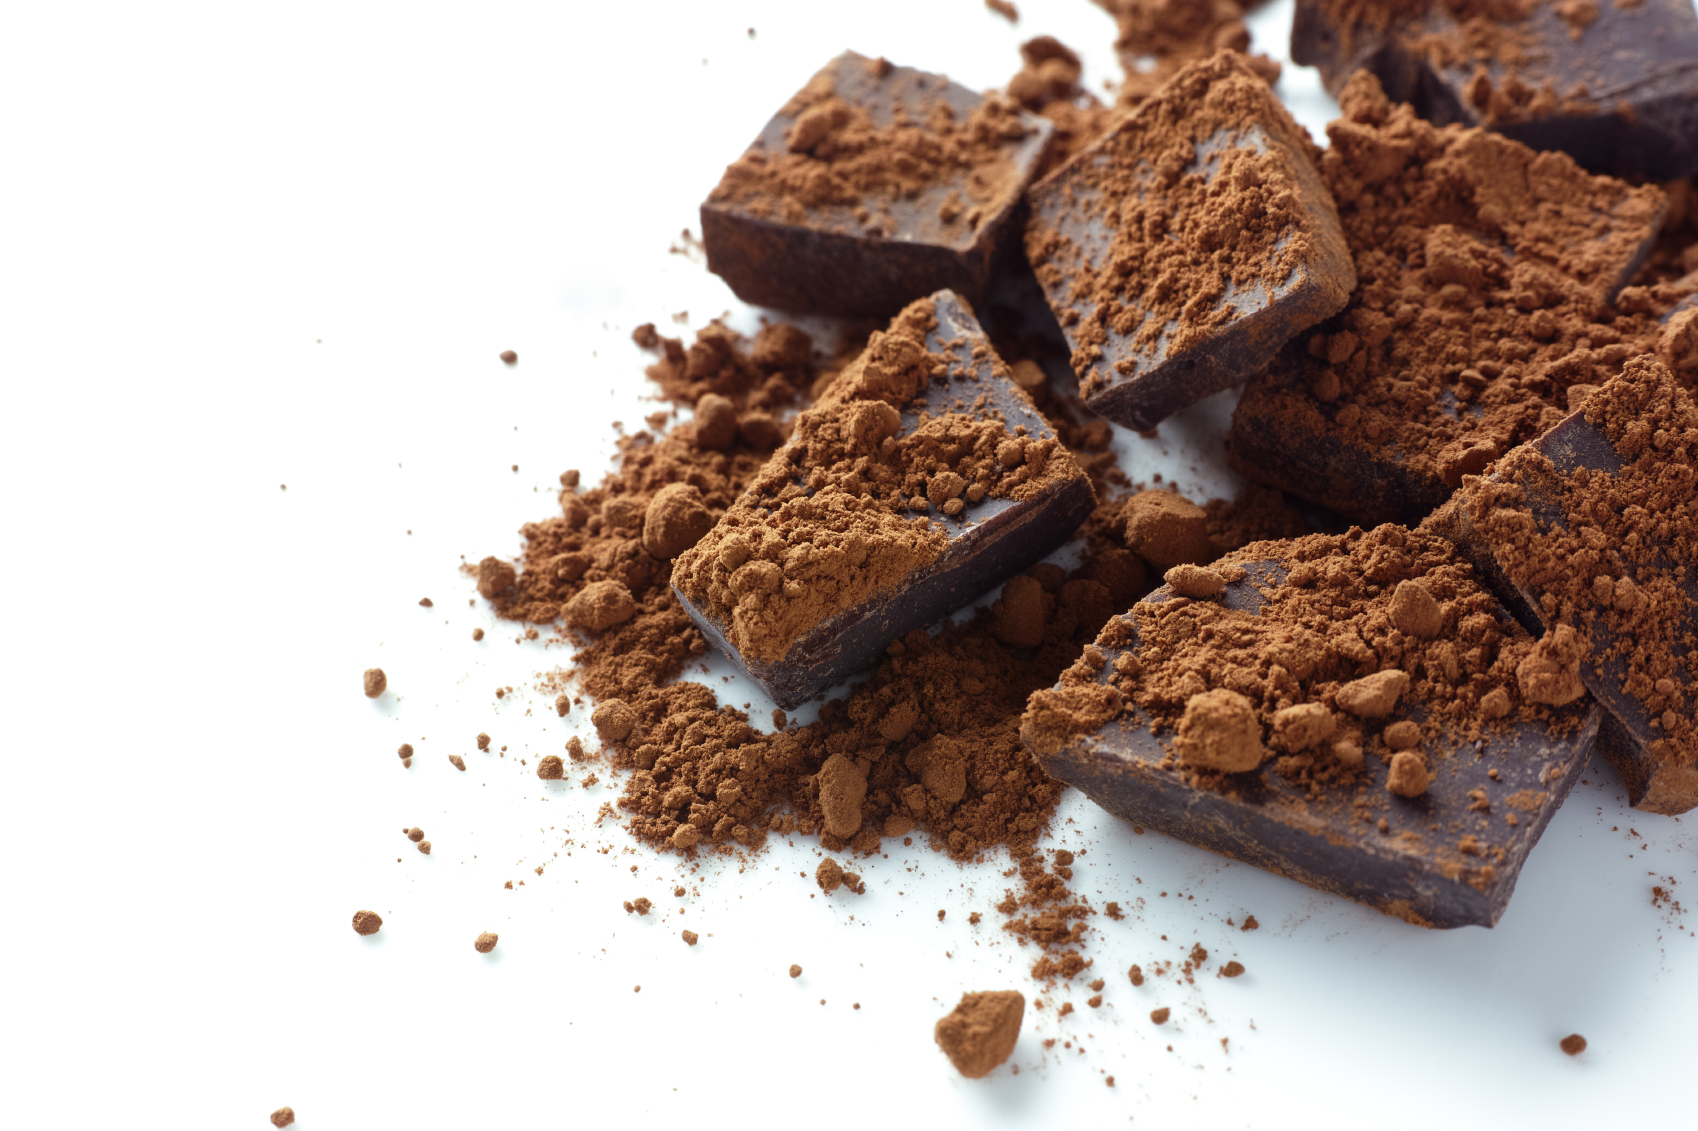 Eating a little dark chocolate every day can effortlessly improve athletic performance, a new British study finds.